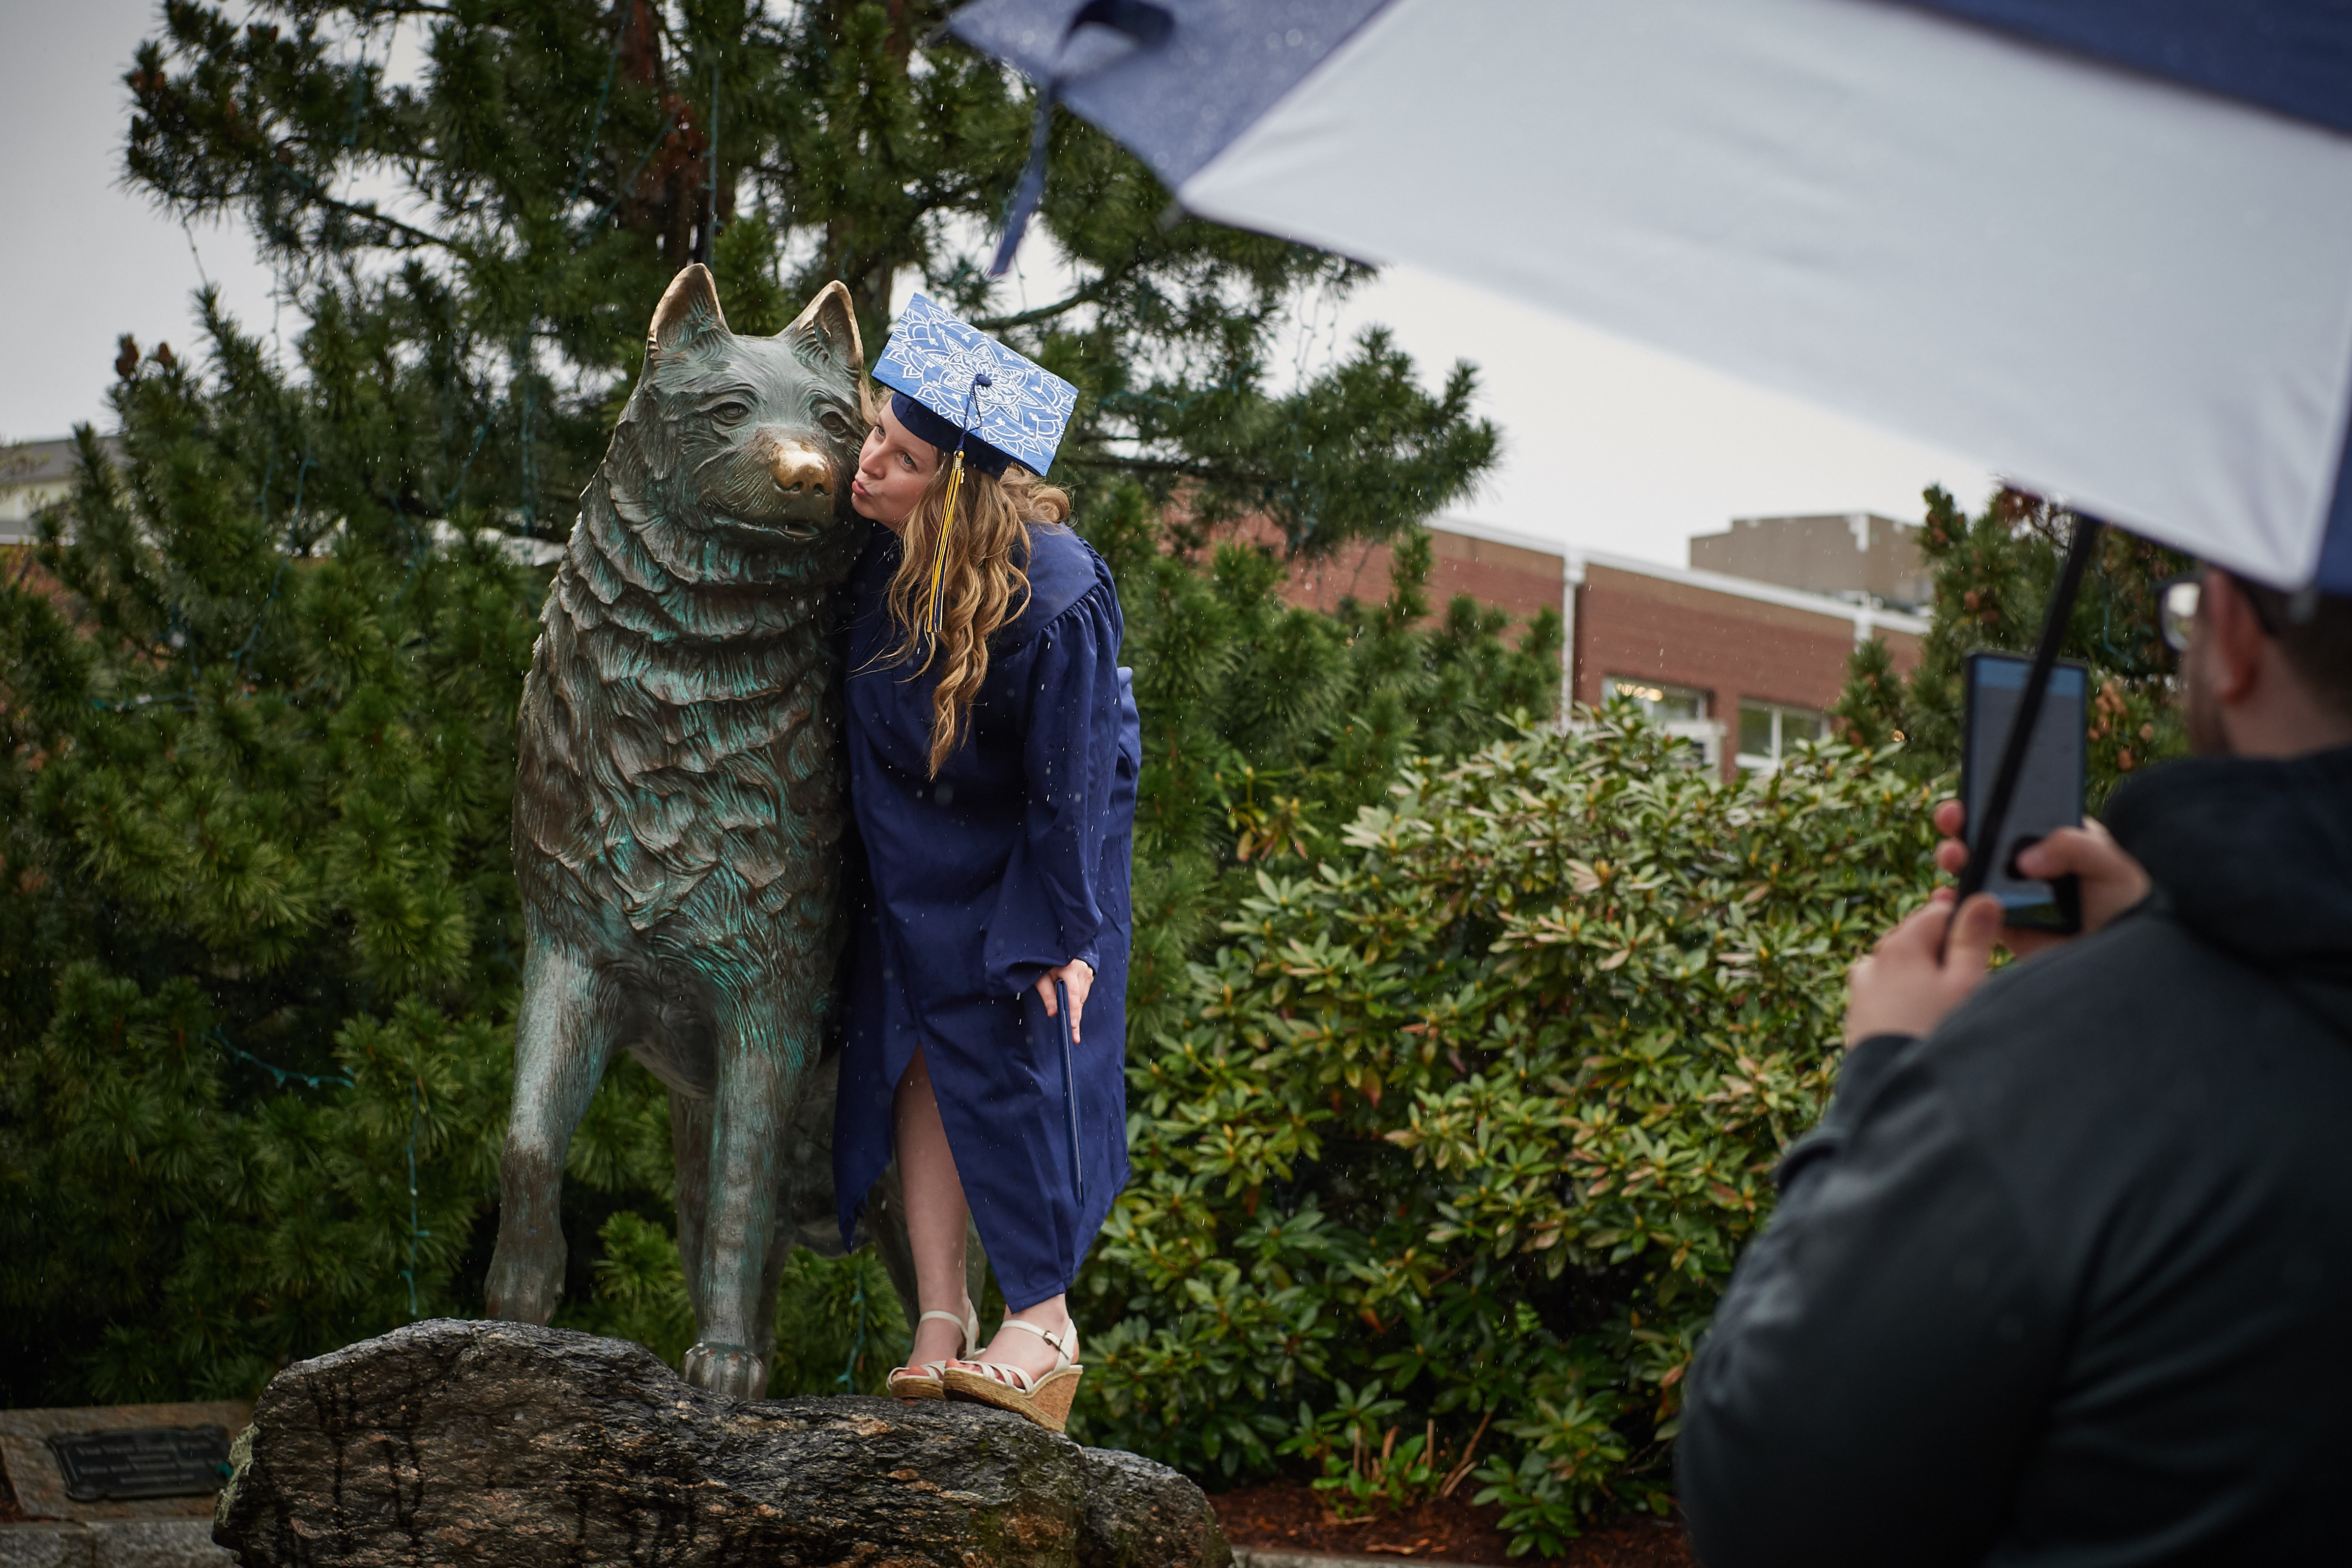 Hannah Steinke gives the husky statue a kiss on the nose following College of Liberal Arts & Sciences commencement ceremony on May 12. (Peter Morenus/UConn Photo)